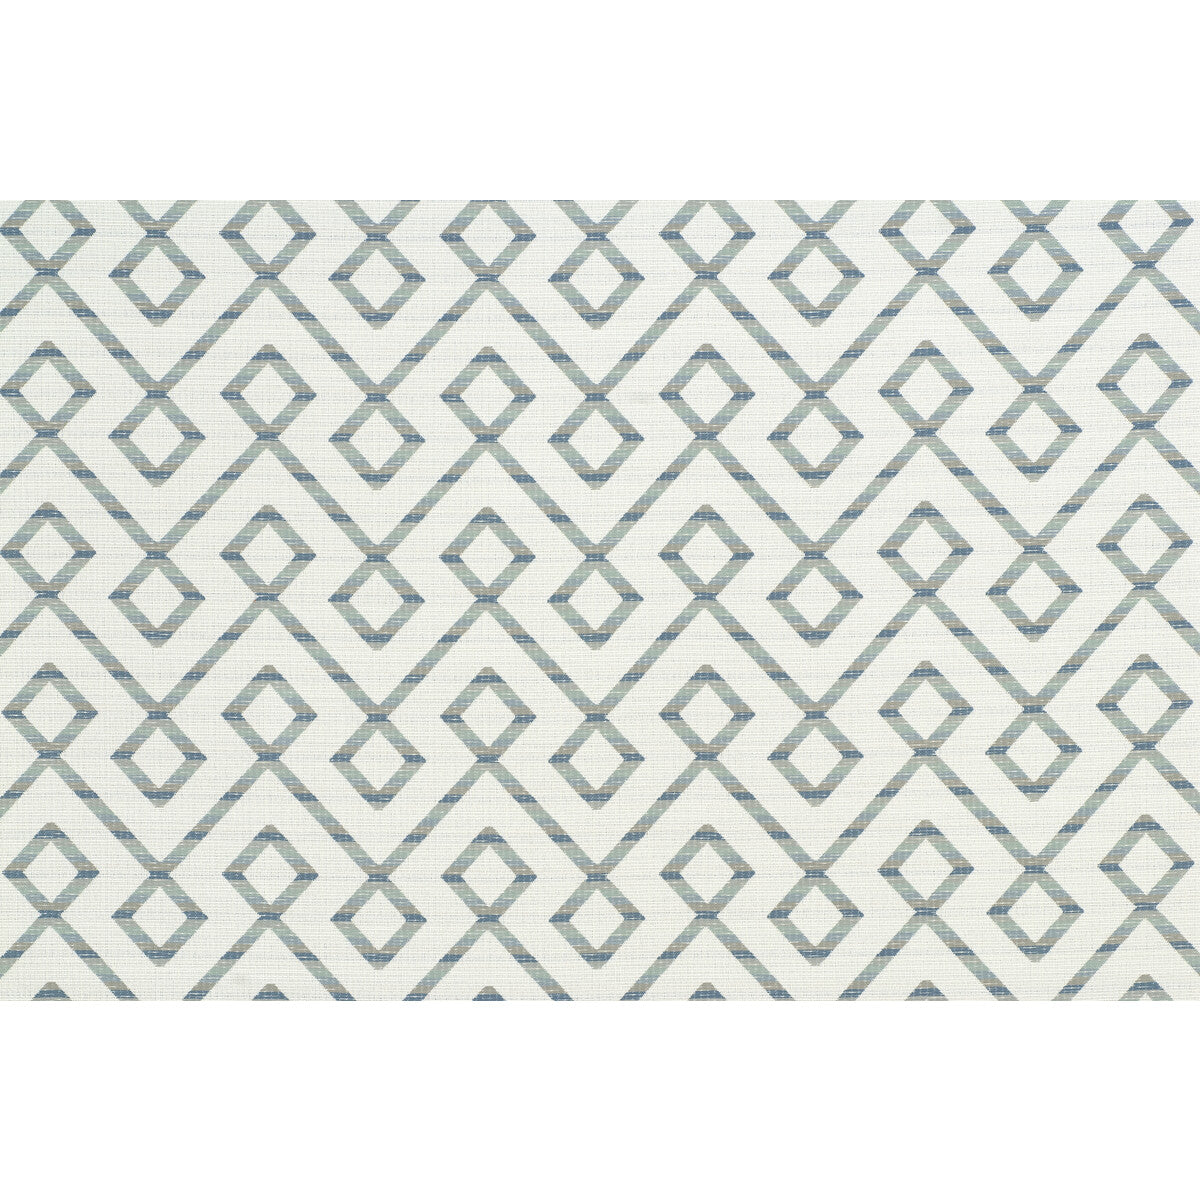 Kravet Design fabric in 34708-15 color - pattern 34708.15.0 - by Kravet Design in the Crypton Home collection